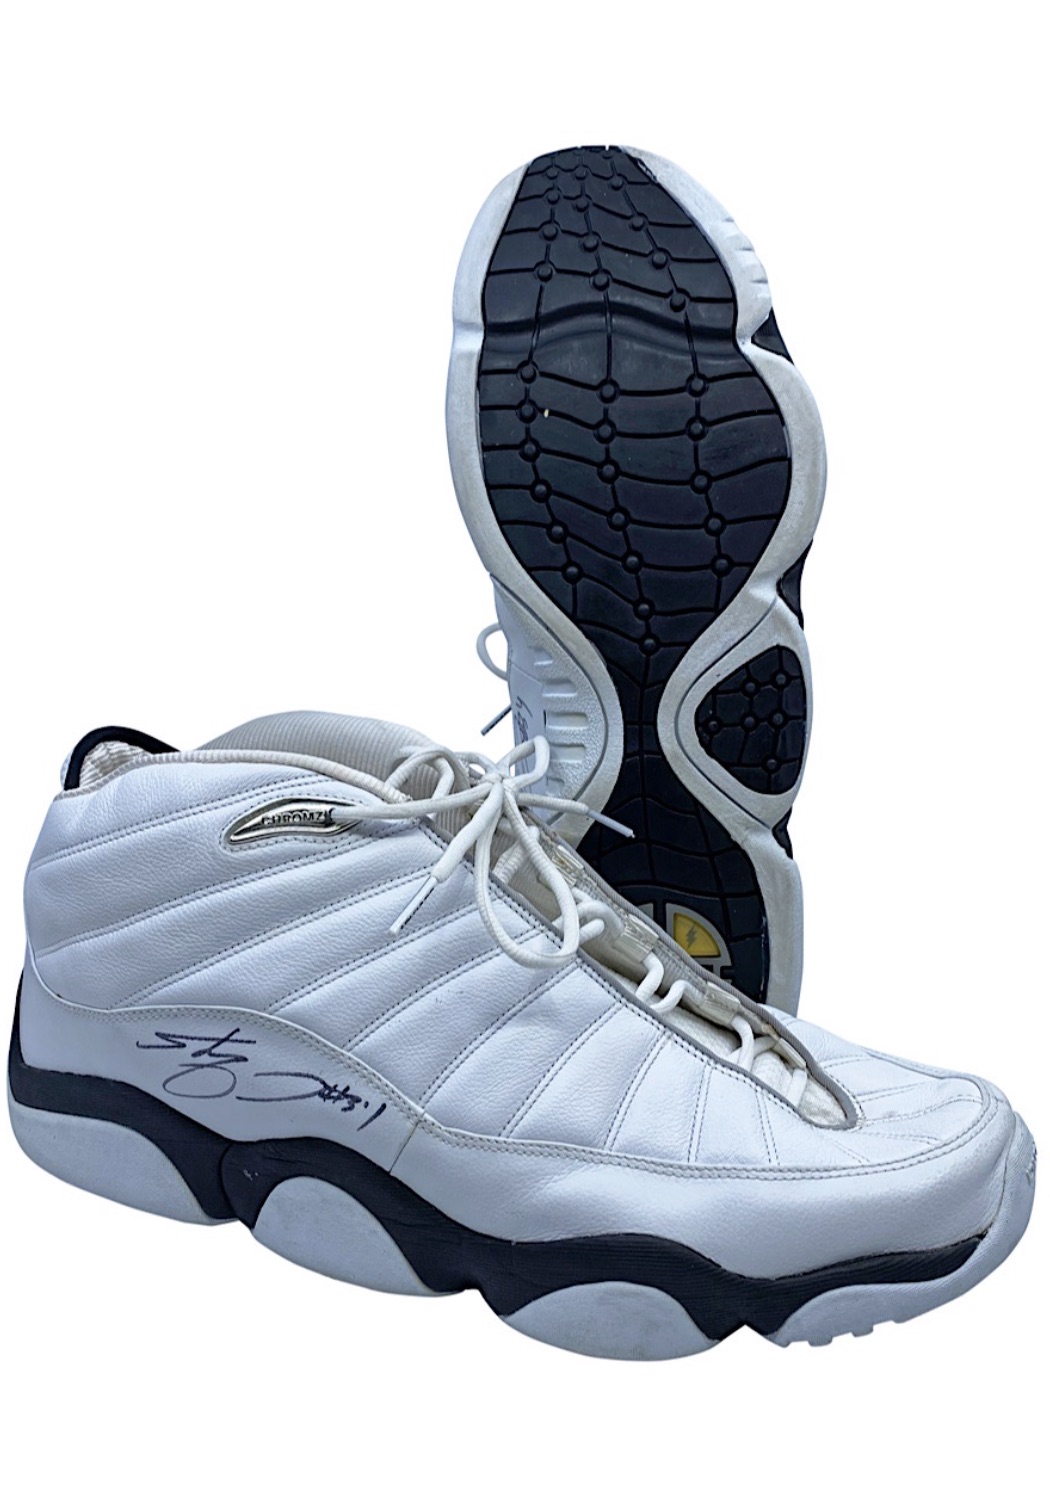 Shaquille O'neal Game Worn And Signed Shoes